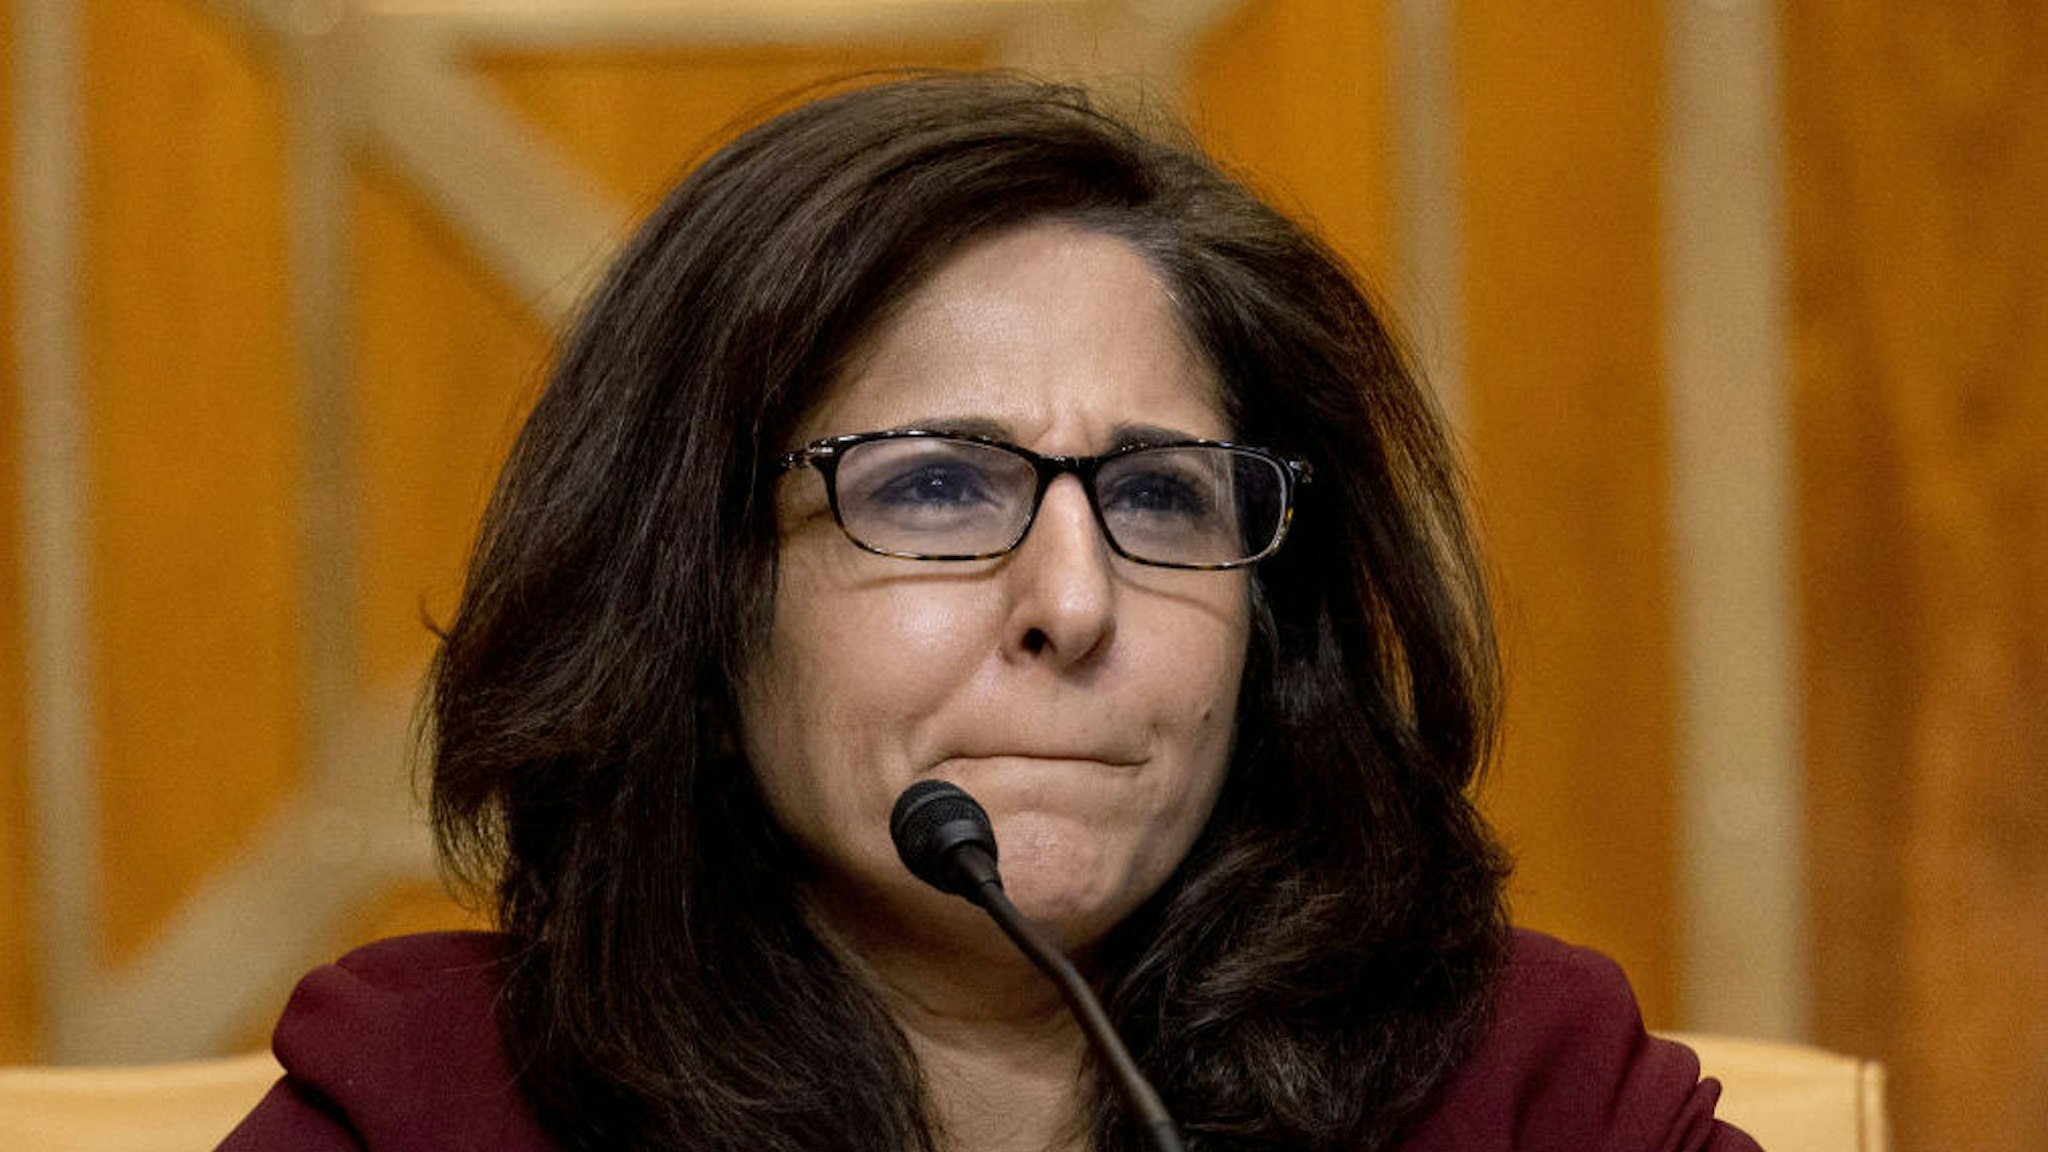 Neera Tanden, director of the Office and Management and Budget (OMB) nominee for U.S. President Joe Biden, appears before a Senate Budget Committee confirmation hearing in Washington, D.C., U.S., on Wednesday, Feb. 10, 2021. Tanden apologized for partisan tweets, pledged to distribute stimulus checks quickly, and defended her stance on Wall Street and Silicon Valley's influence in yesterday's hearing on her nomination to lead the OMB.